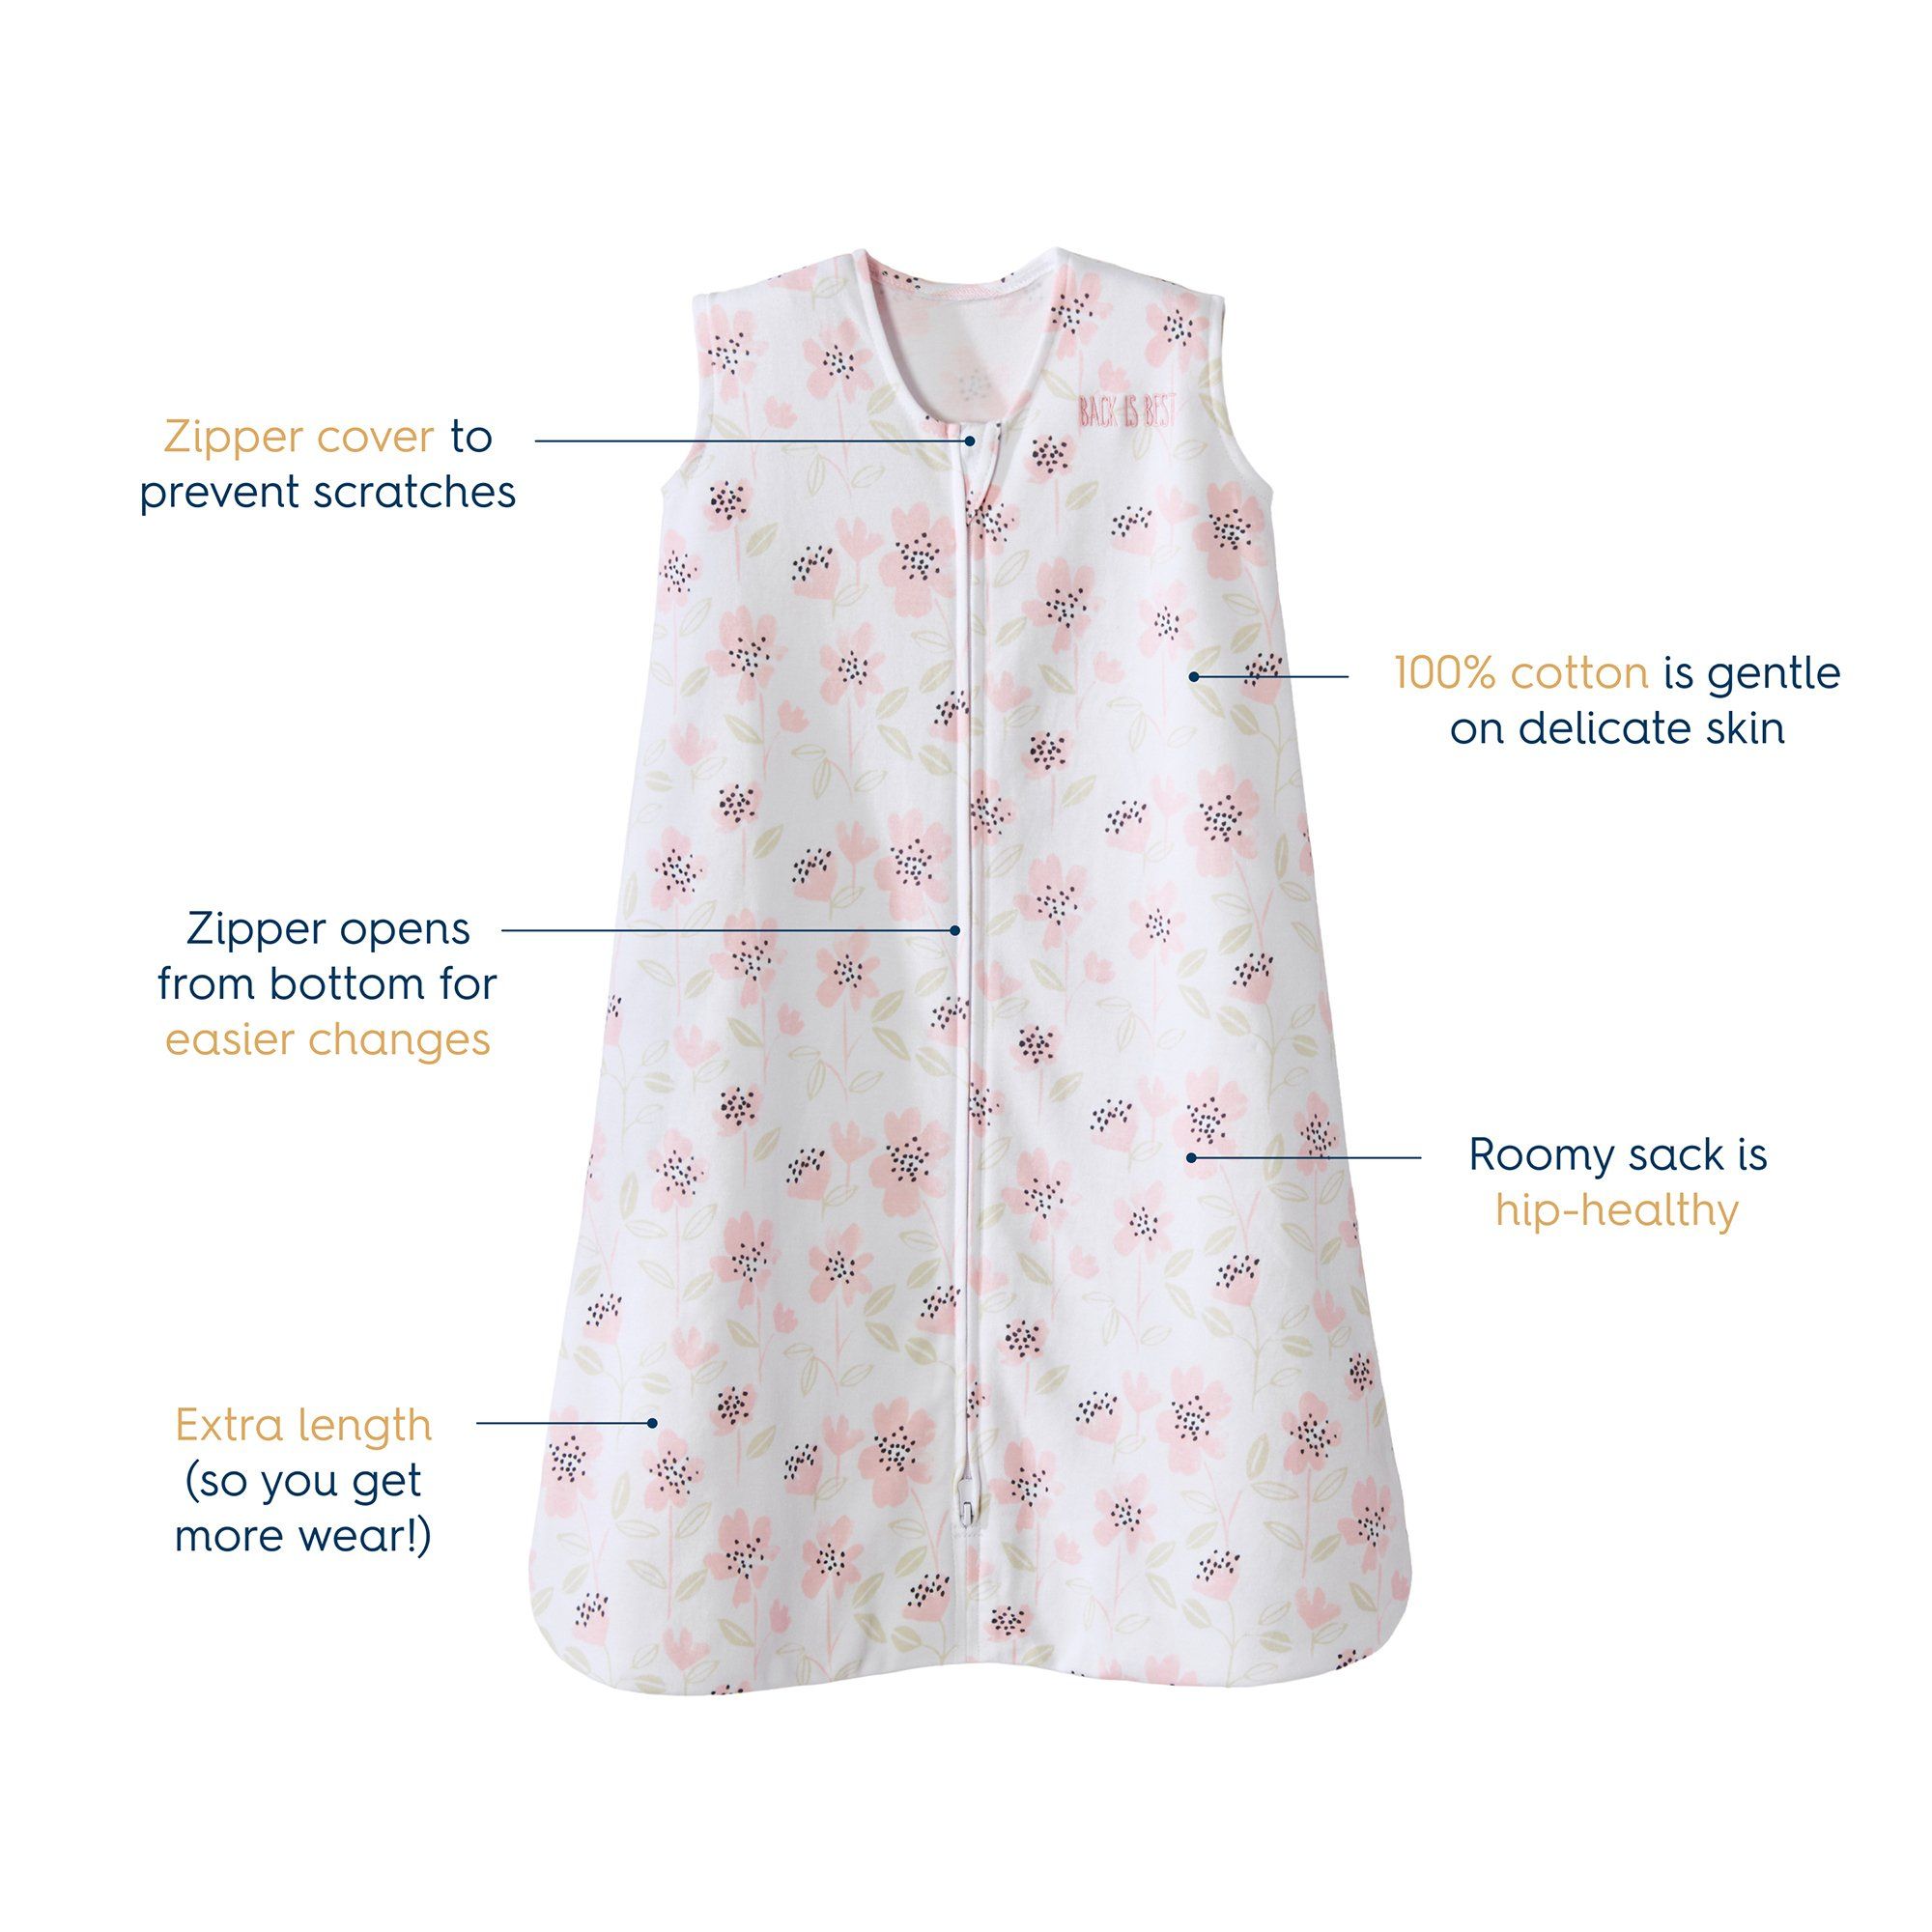 HALO Wearable Blanket, Blush Wildflower, Large (12 to 18 Months) - 1 ct